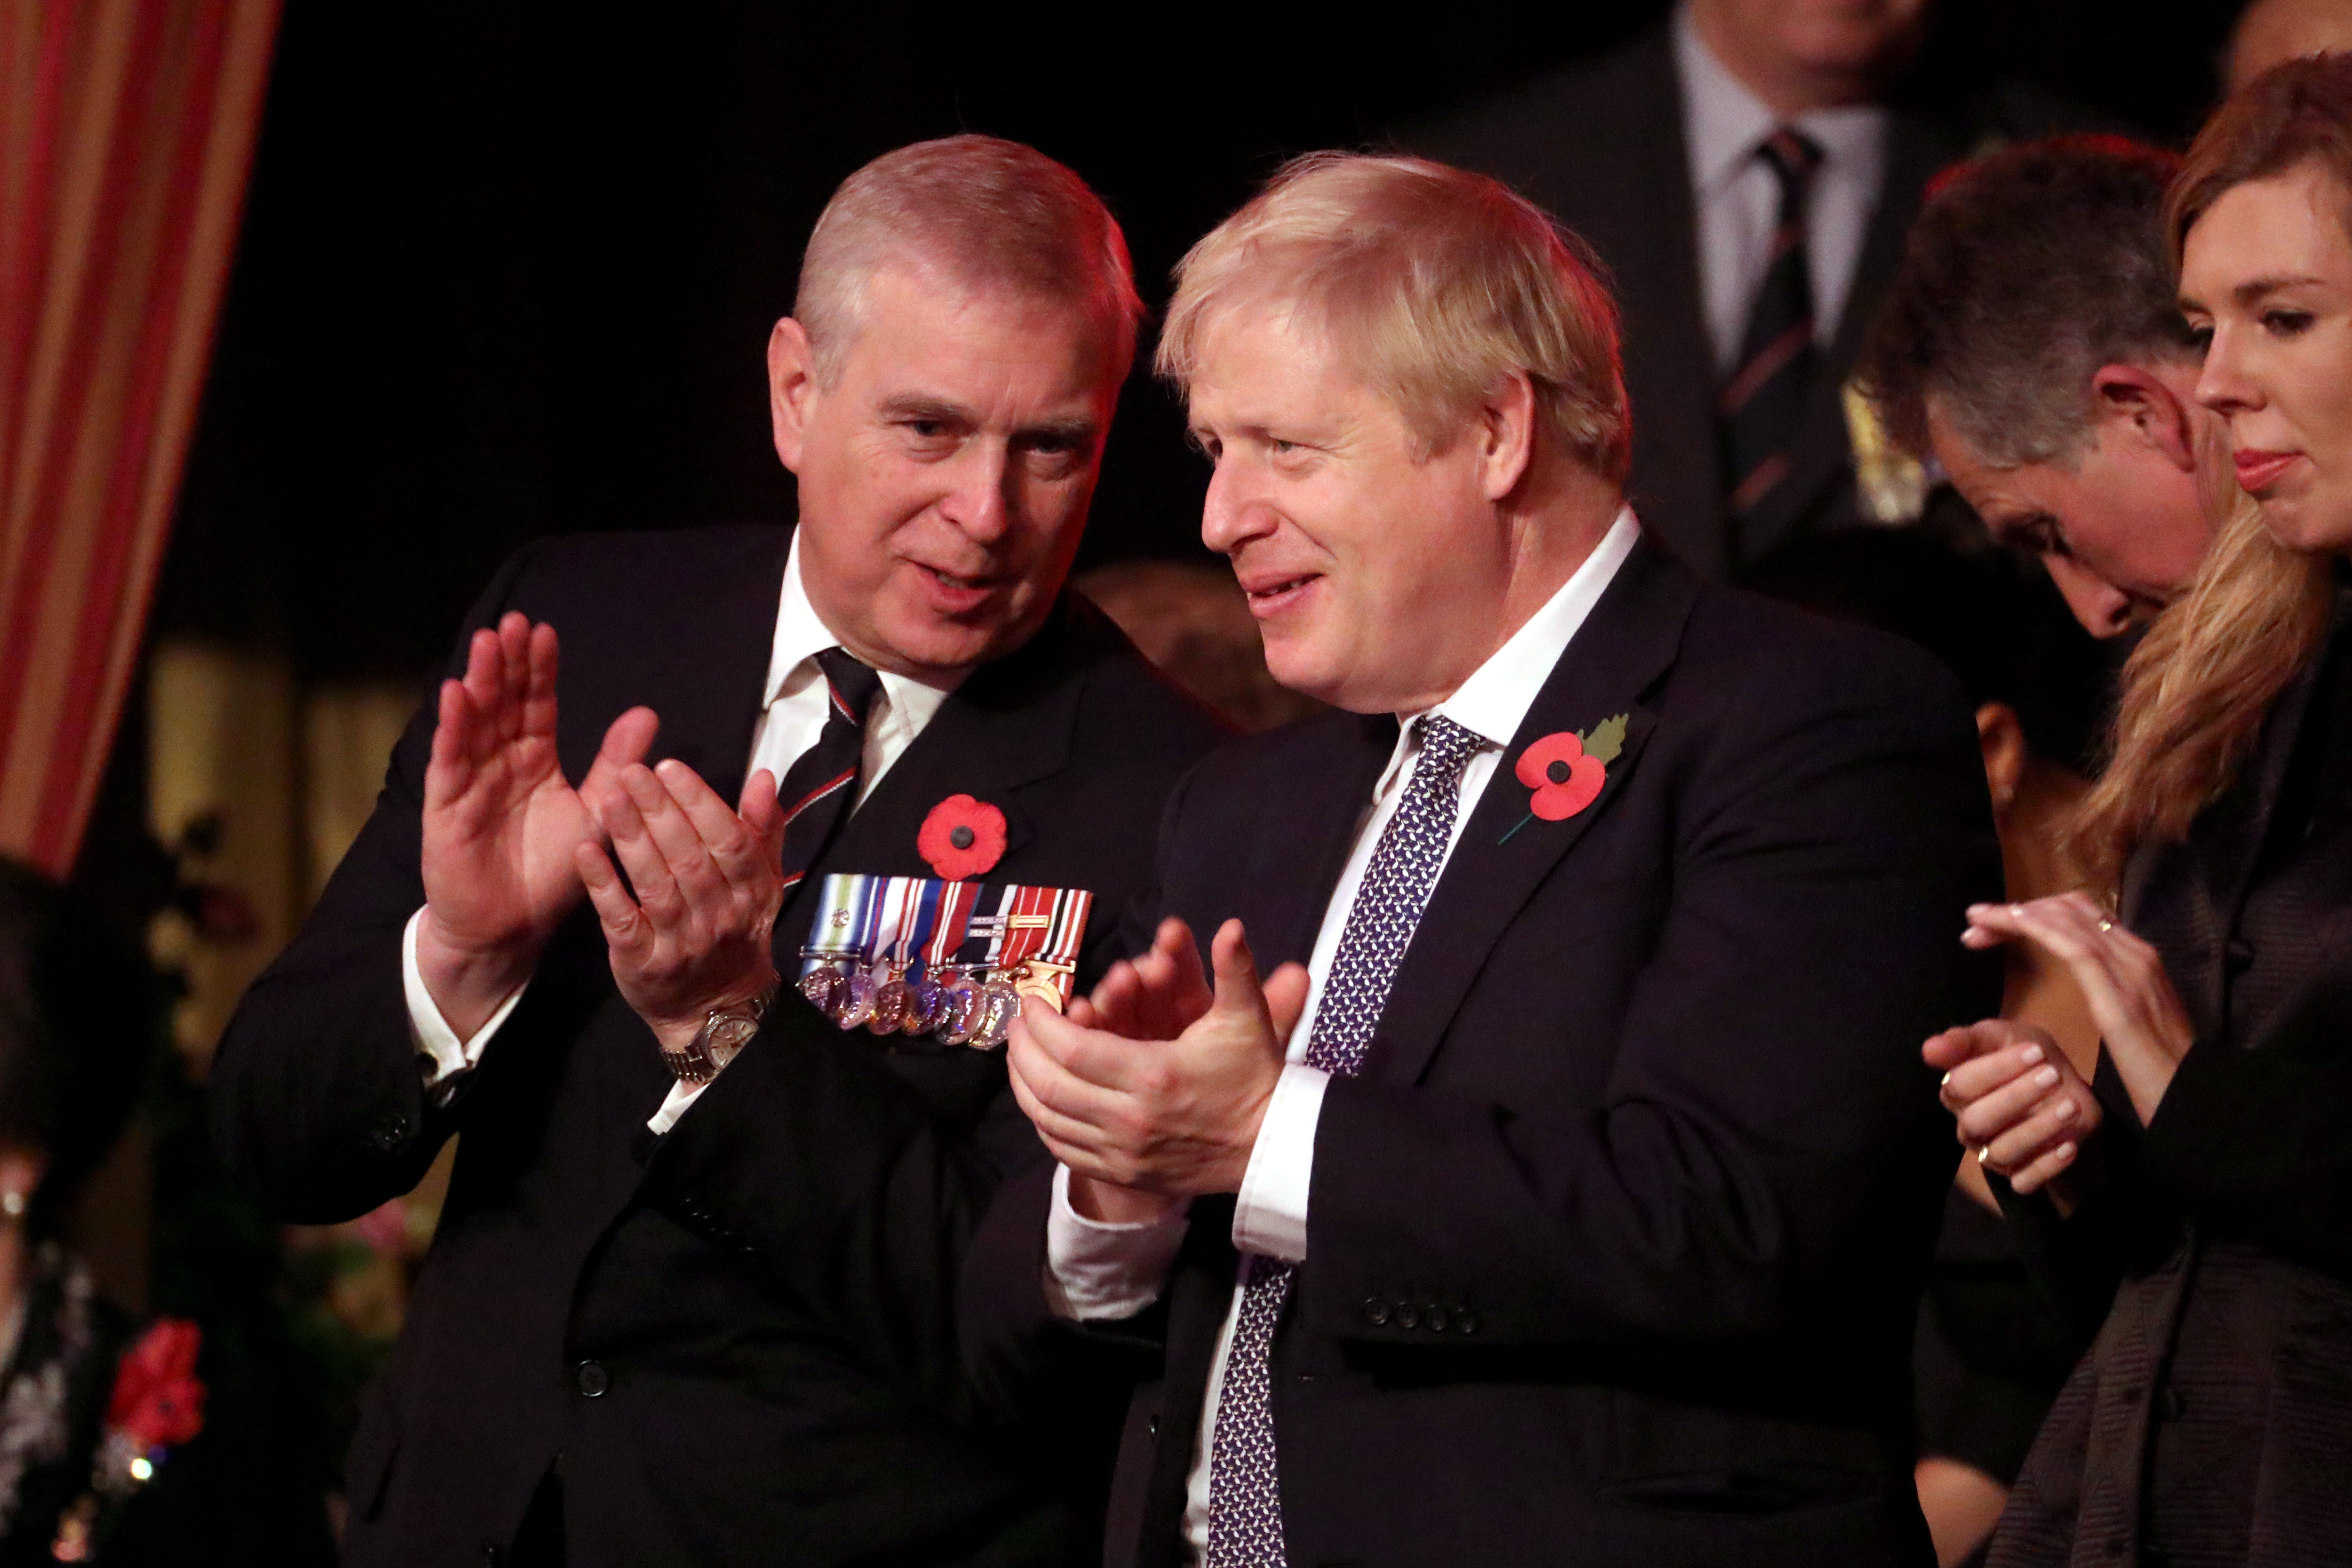 Some have suggested travails of Prince Andrew may ease pressure on Boris Johnson